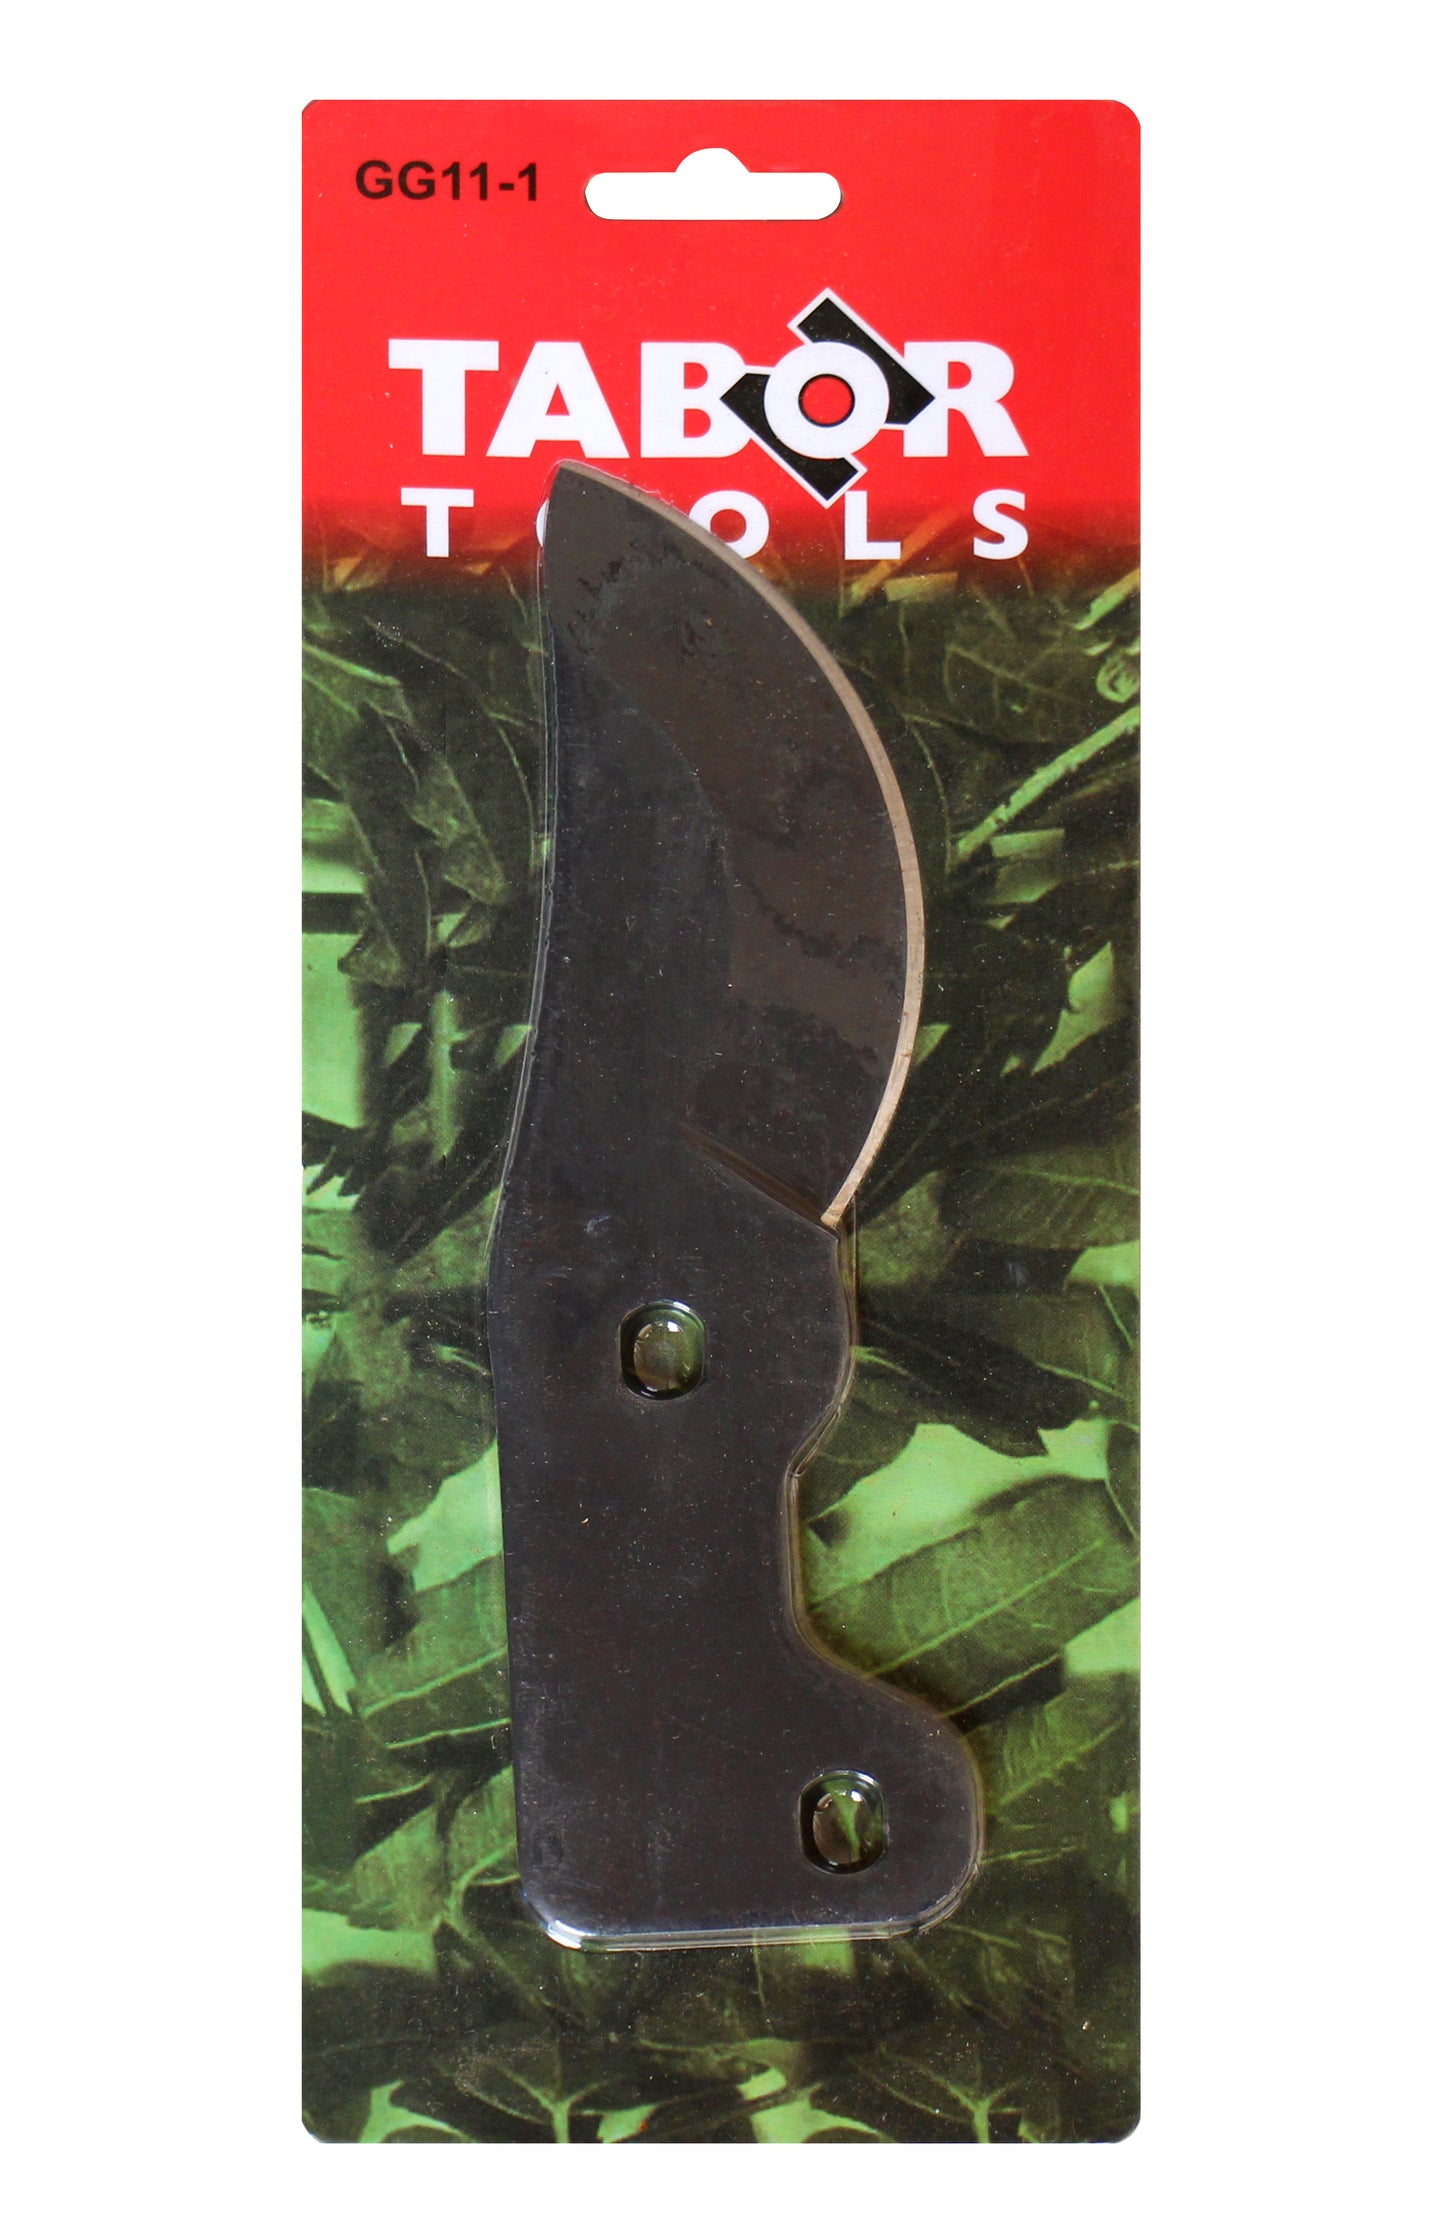 TABOR TOOLS GG11-1 Replacement Cutting Blade for GG11A Bypass Lopper